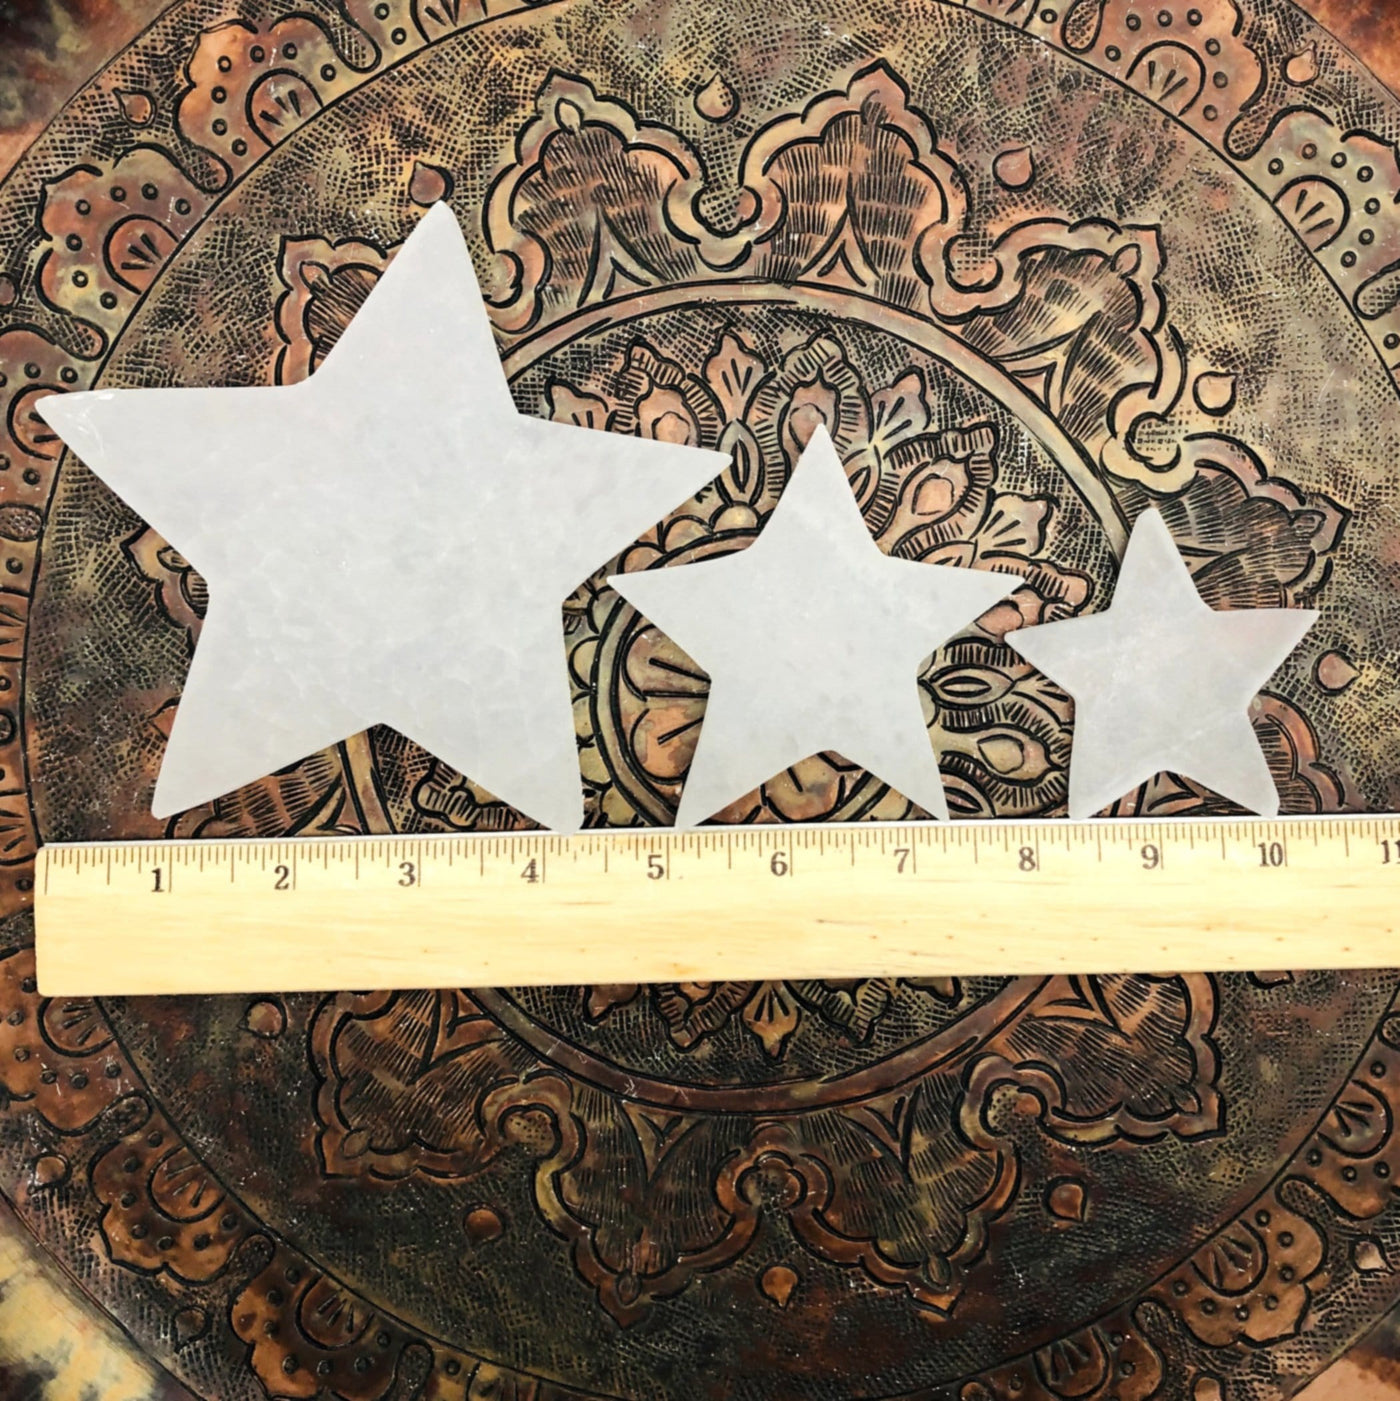 all selenite star size options with ruler for size reference